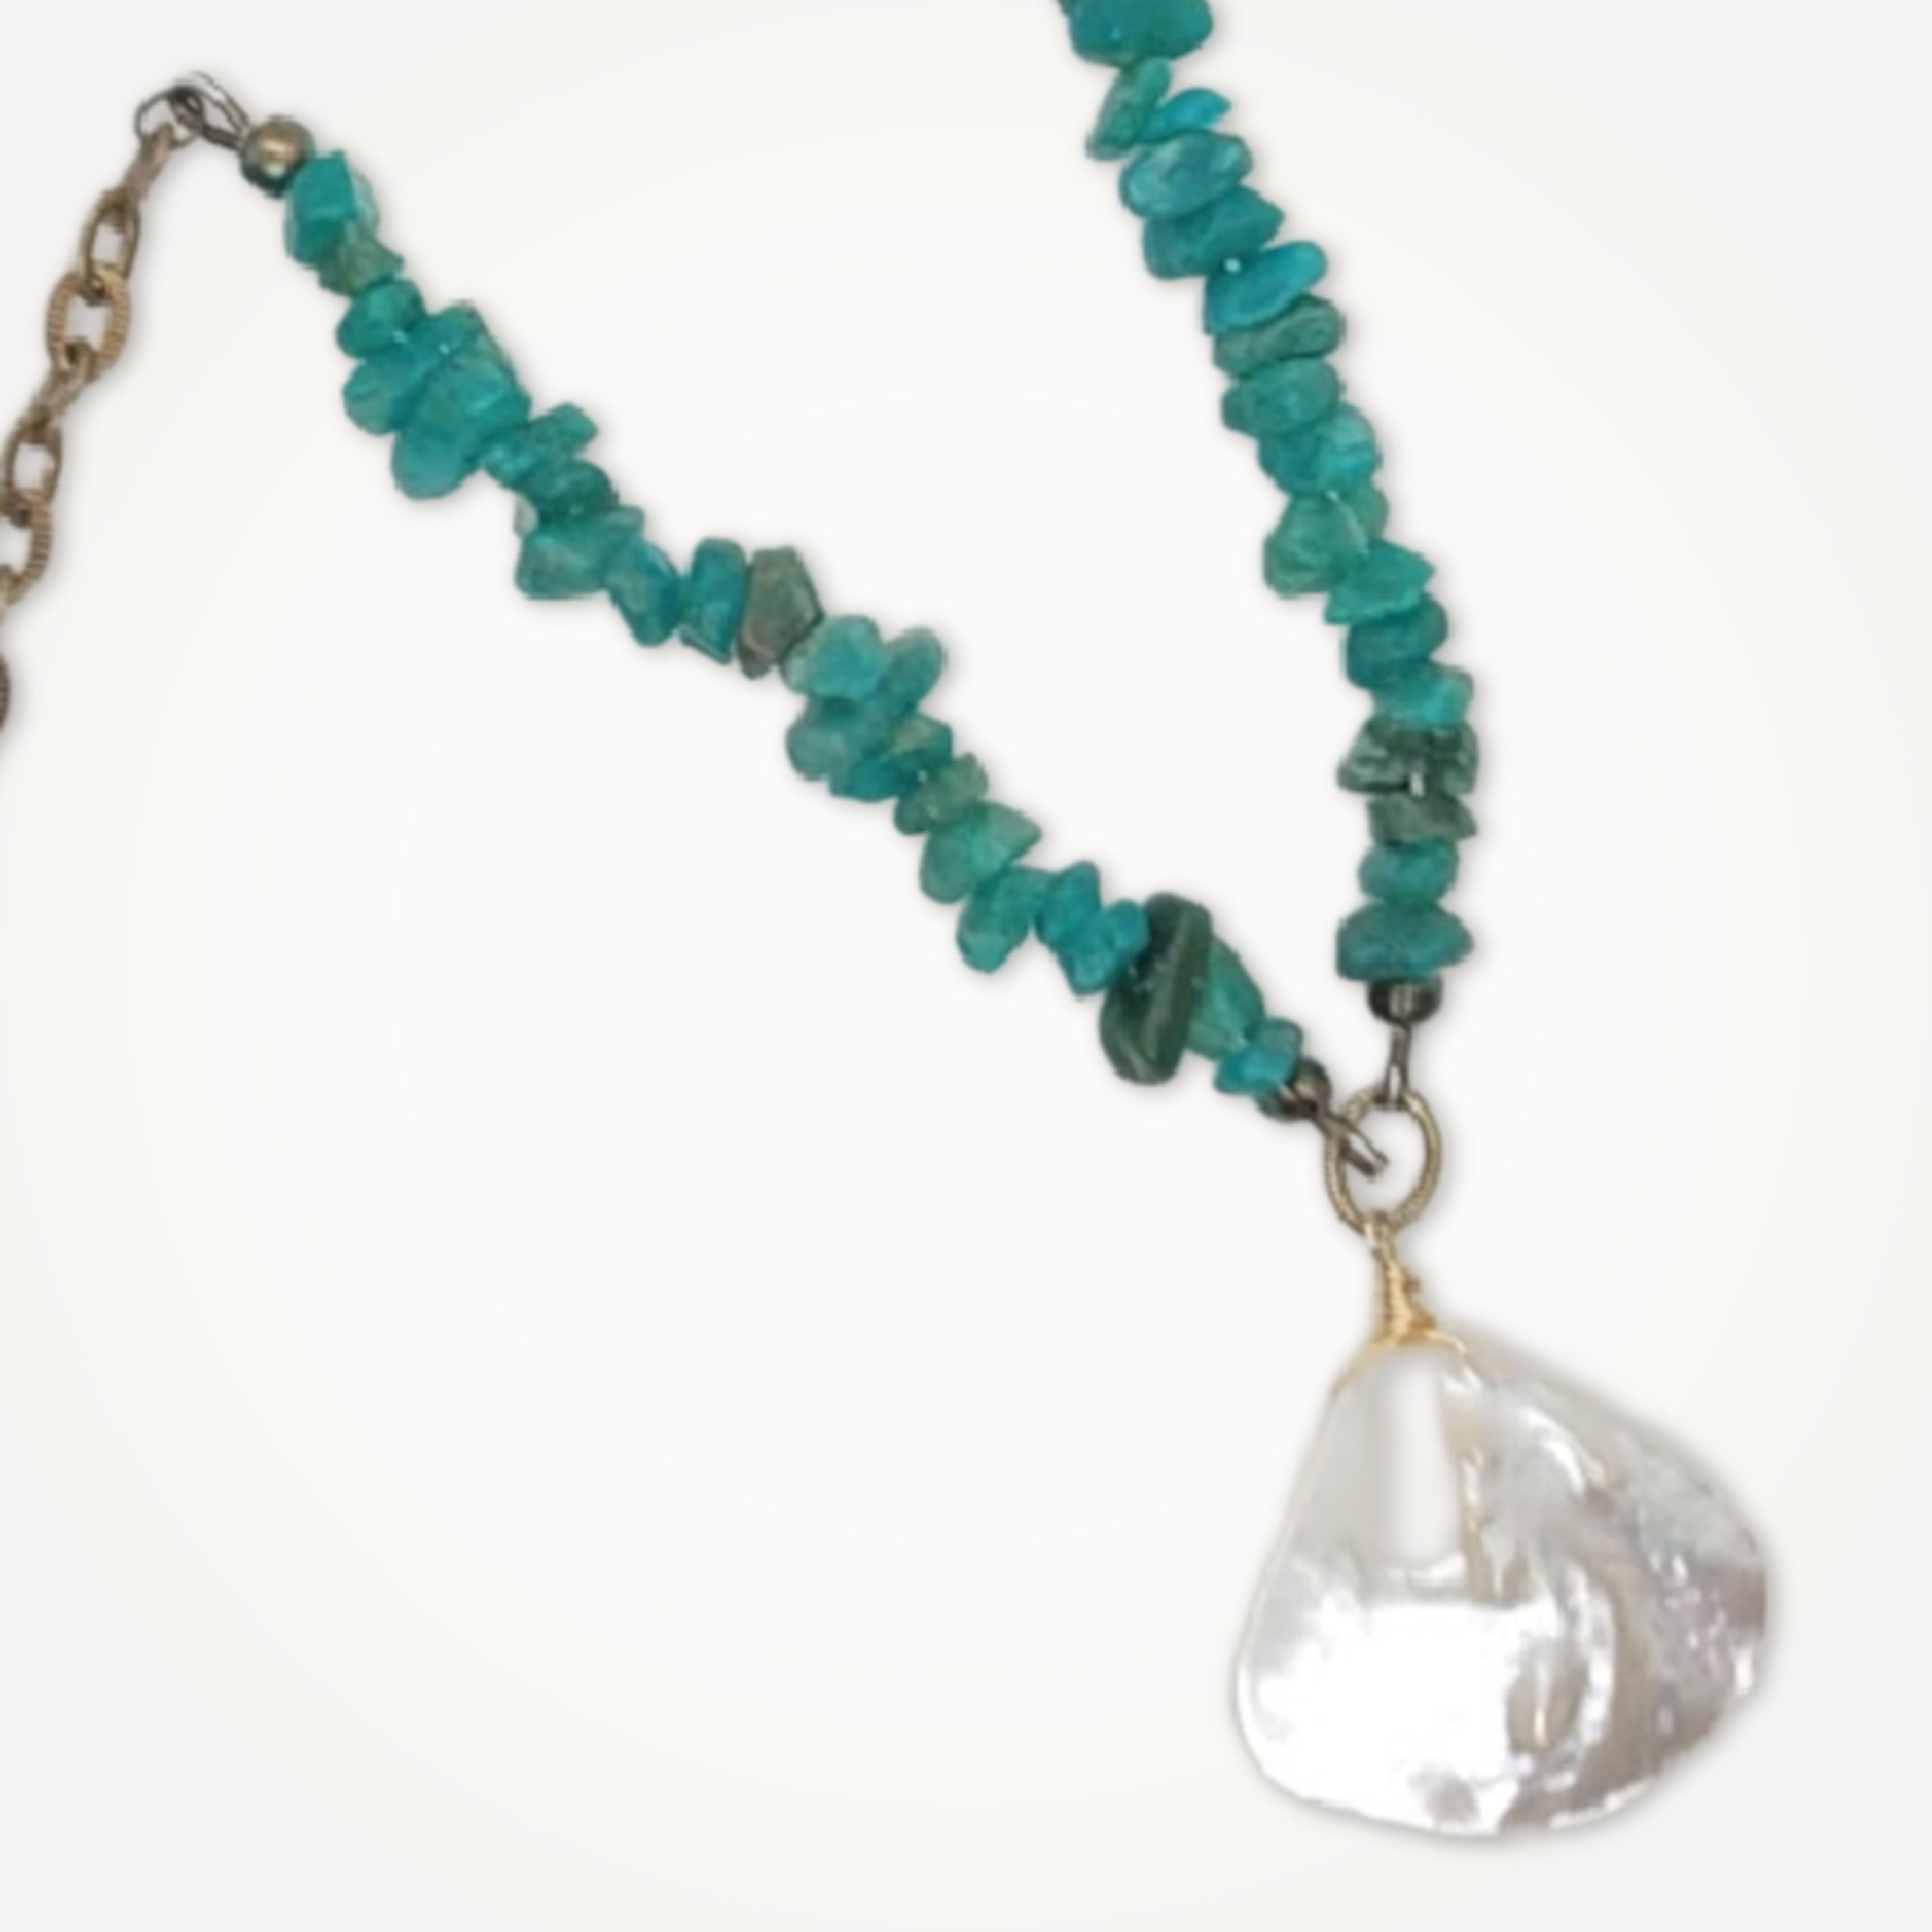 Shoreline Necklace • Mother of Pearl Necklace, Green Amazonite